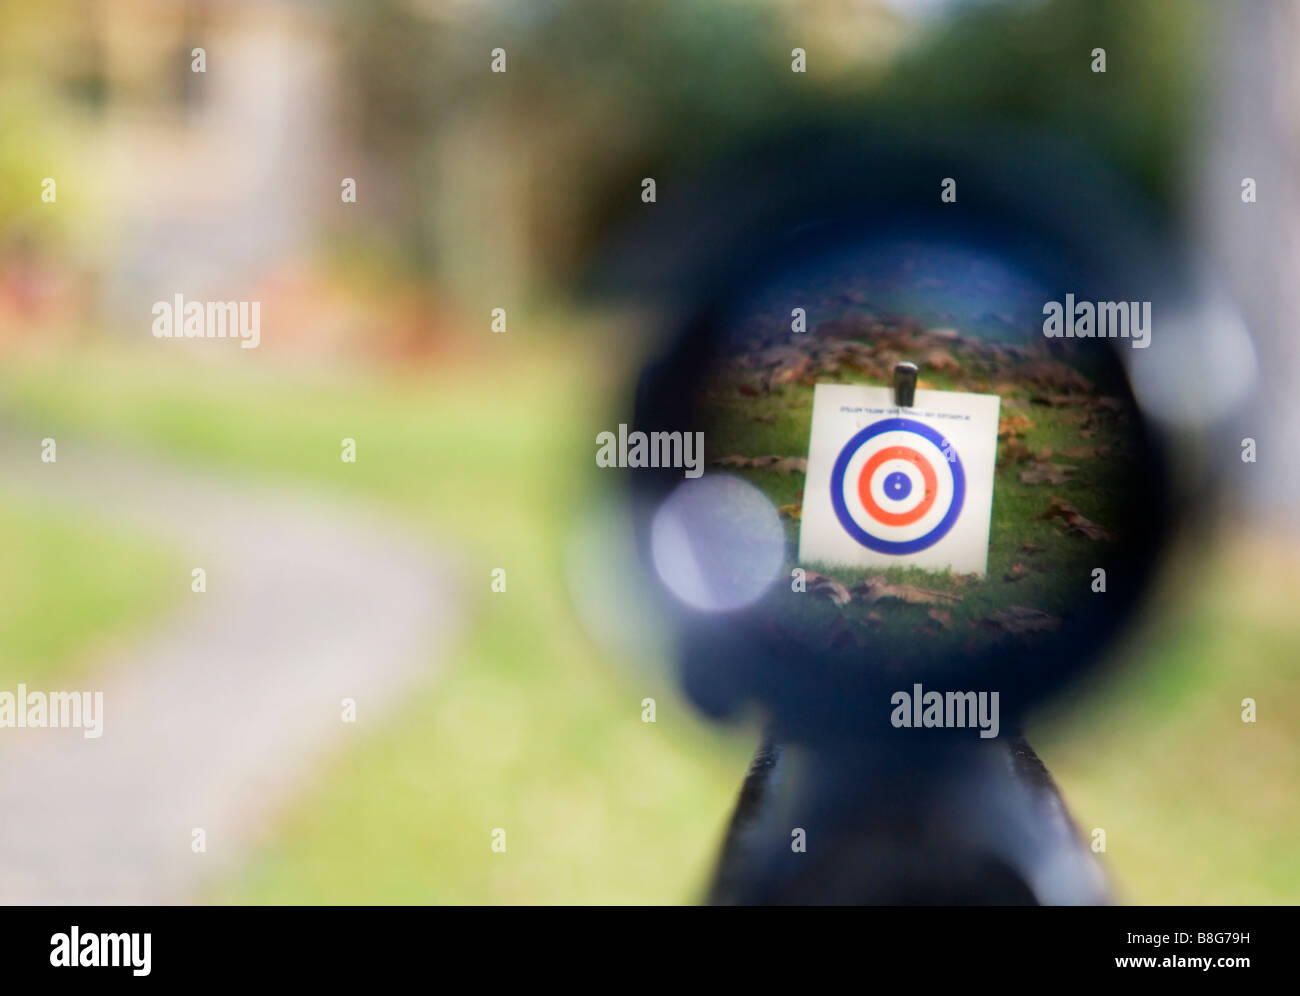 Taking aim. Target in sight. View of a target down the scope of an air rifle. Stock Photo